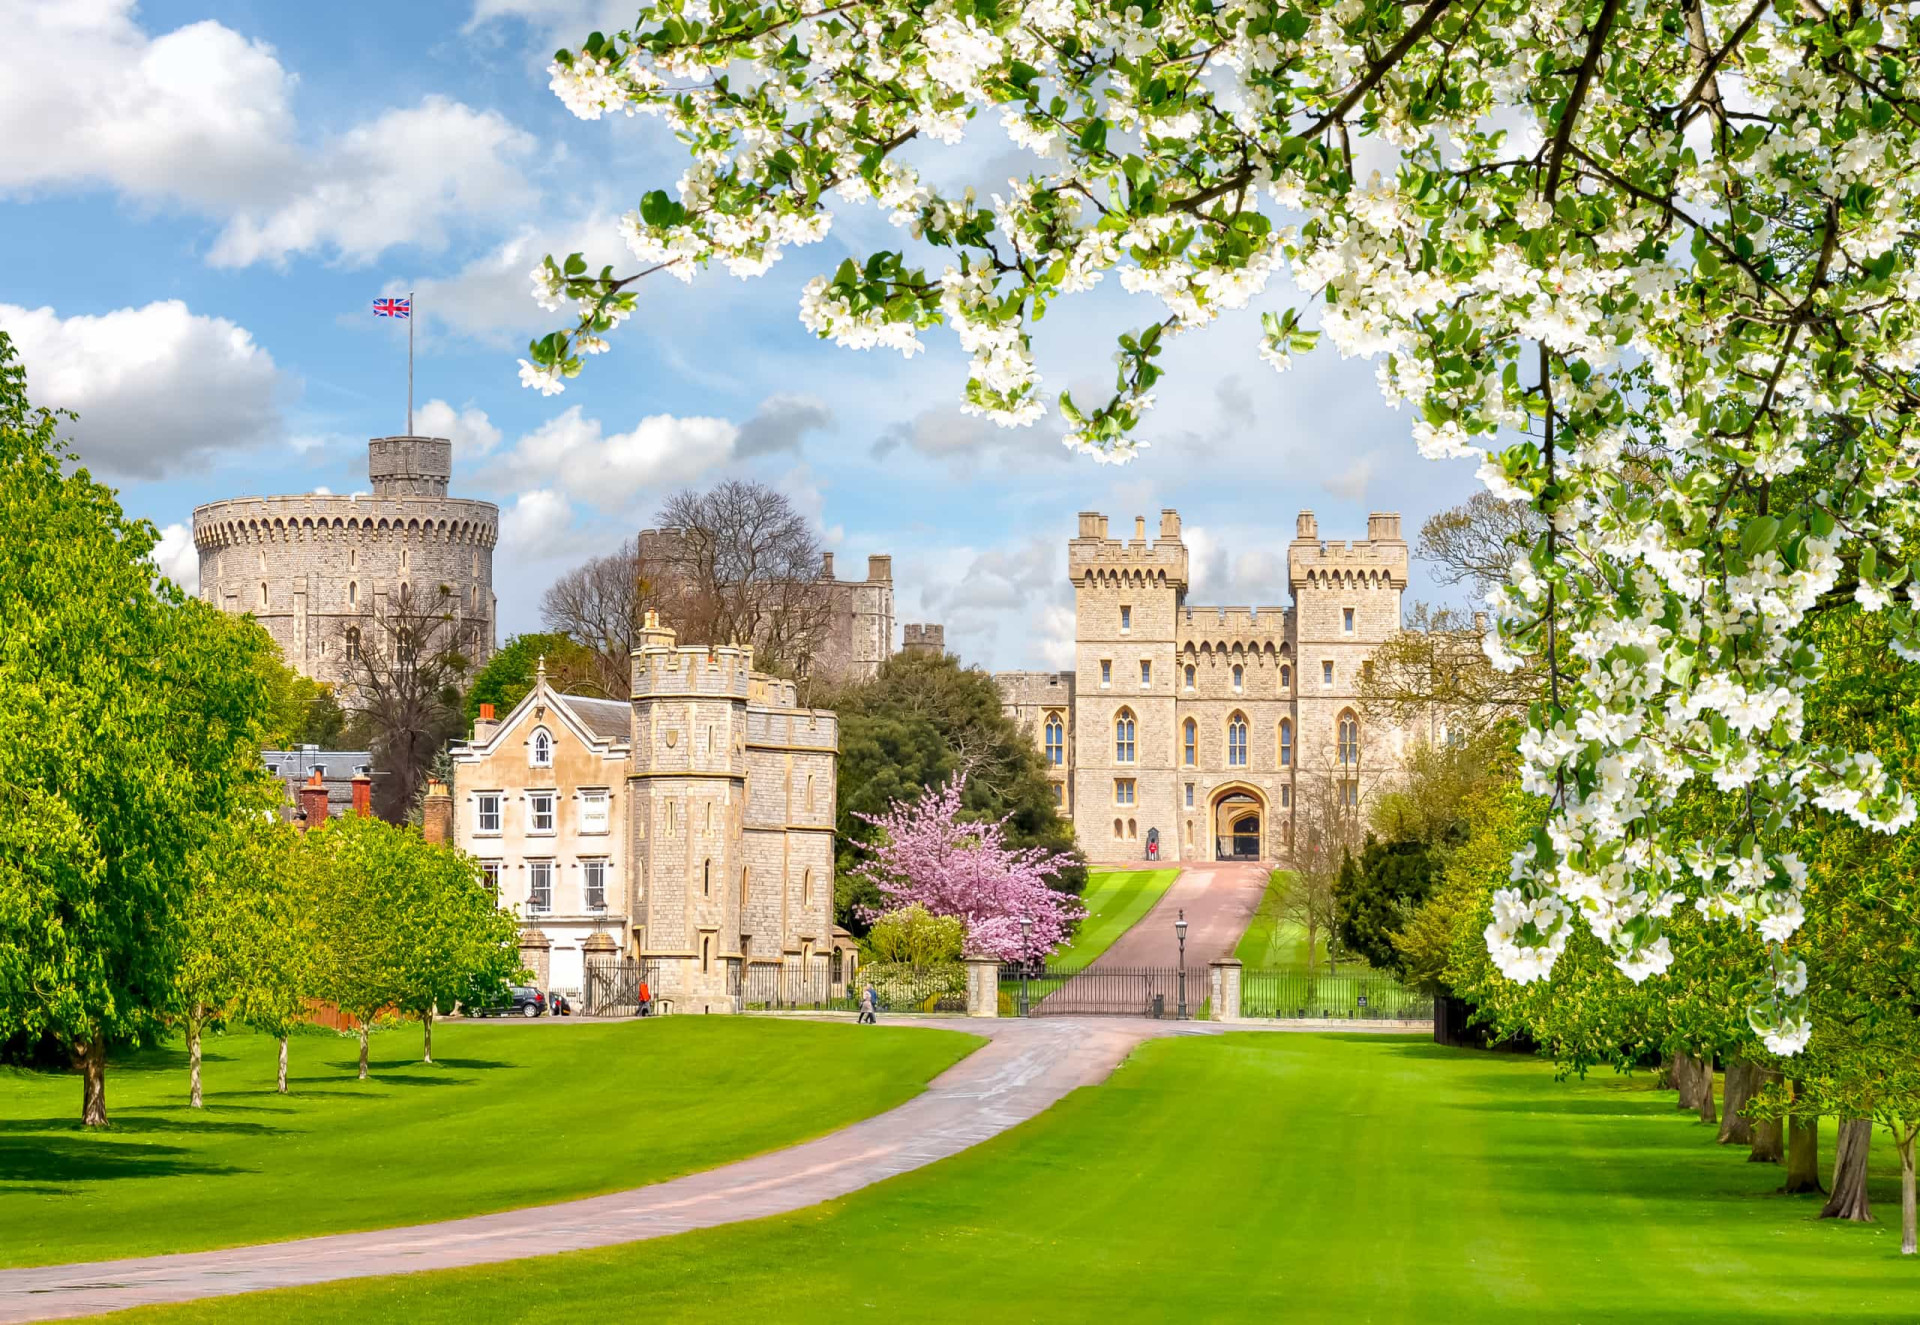 <p>Windsor in Berkshire is the home of Windsor Castle, the largest occupied castle in the world. You probably recognize it from Harry and Meghan's wedding photograph. Aside from the castle, there is a lot to see in this town, not least some beautiful gardens. You can also visit the Ascot racecourse nearby.</p><p>You may also like:<a href="https://www.starsinsider.com/n/184322?utm_source=msn.com&utm_medium=display&utm_campaign=referral_description&utm_content=471299v4en-en"> The most romantic moments of the Oscars</a></p>